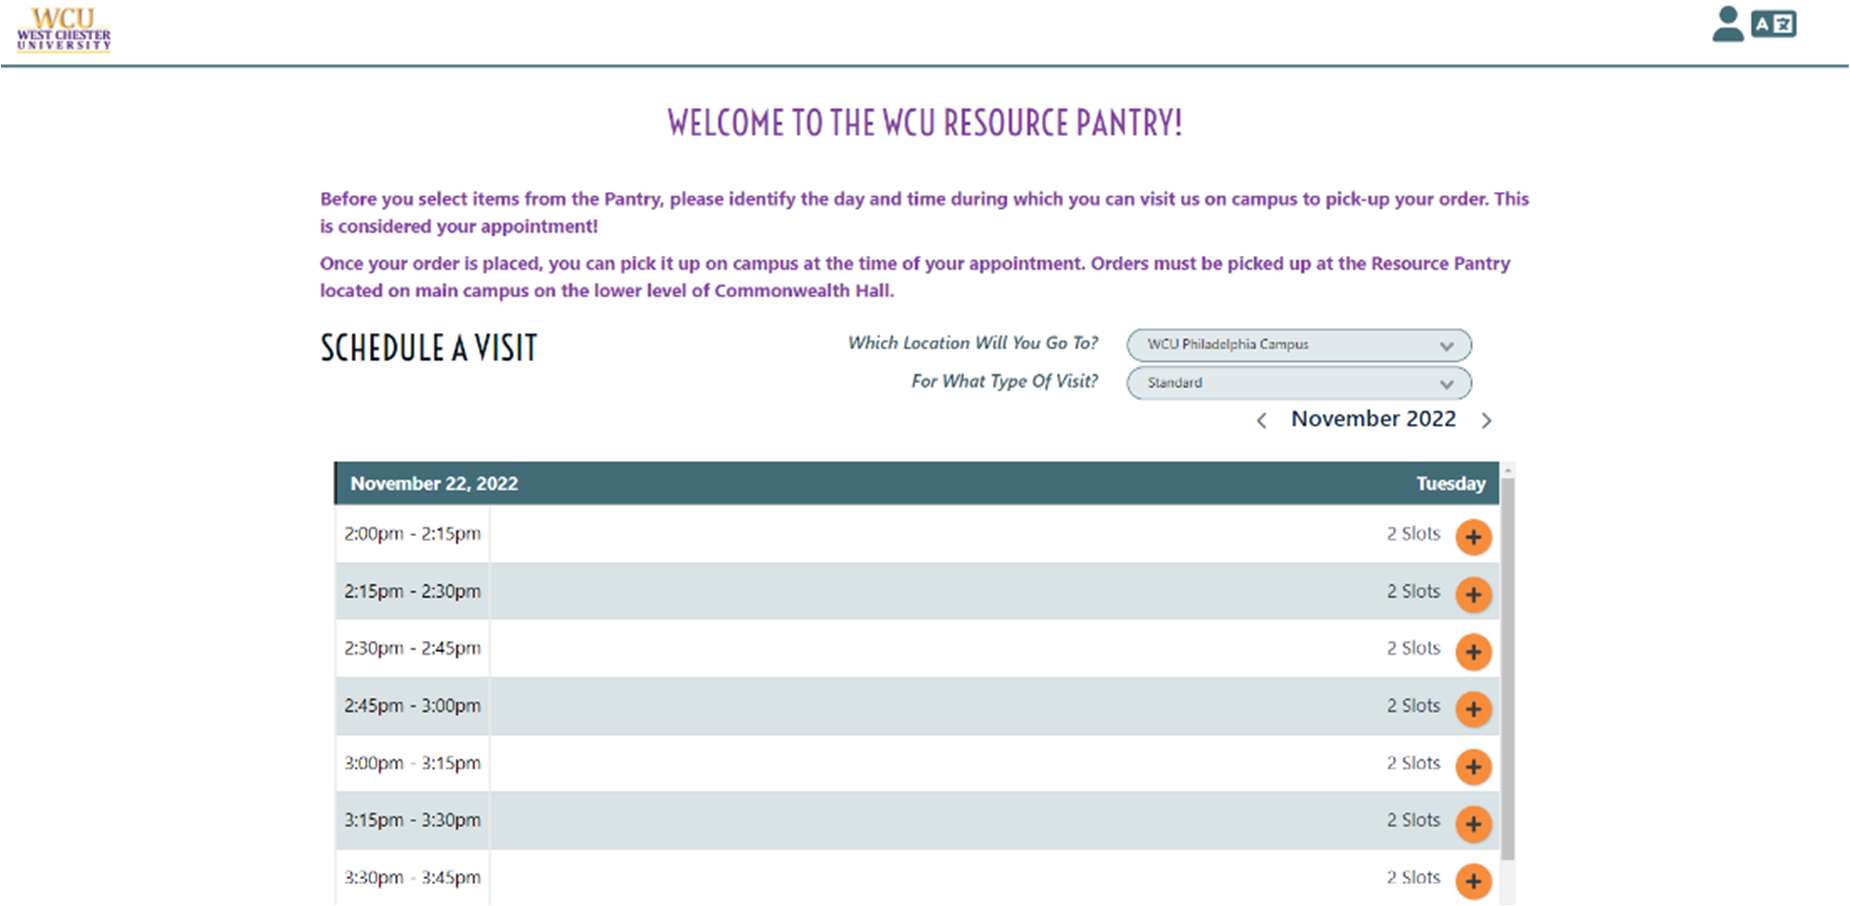 Screenshot of a webpage showing appointment times. Text is: Welcome to the WCU Resources Pantry! Before you select items from the Pantry, please identify the day and time during which you can visit us on campus to pick-up your order. This is considered your appointment! Once your order is placed, you can pick it up on campus at the time of your appointment. Orders must be picked up at the Resource Pantry located on main campus on the lower level of Commonwealth Hall. Schedule a Visit: Which Location Will You Go To? For What Type Of Visit? November 22, 2022 - 2:00pm - 2:15pm: 2 slots, 2:15pm - 2:30pm: 2 slots, 2:30pm - 2:45pm: 2 slots, 2:45pm - 3:00pm: 2 slots, 3:00pm - 3:15pm: 2 slots, 3:15pm - 3:30pm: 2 slots, 3:30pm - 3:45pm: 2 slots